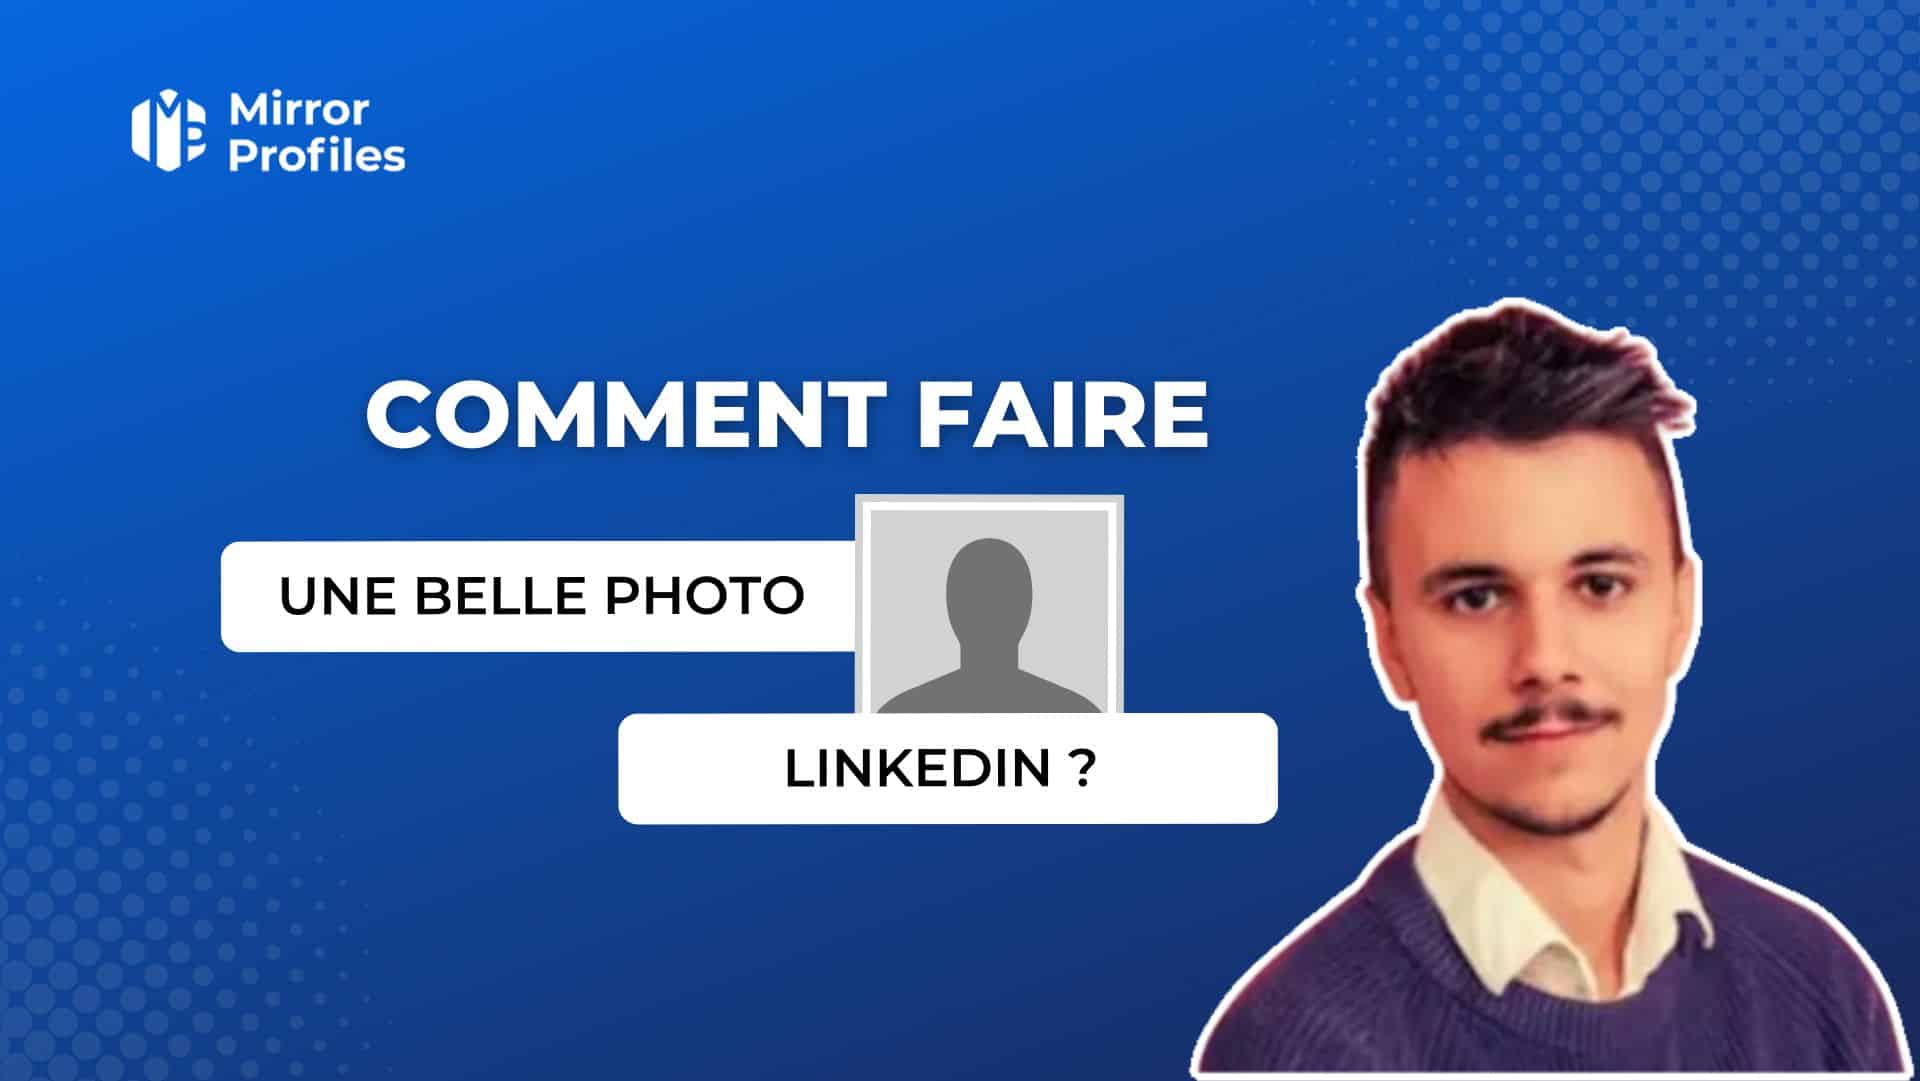 Image showing a blue background with the title "COMMENT FAIRE UNE BELLE PHOTO LINKEDIN?" in French. A headshot of a man with short hair and a mustache is on the right. Text at the top left says "Mirror Profiles," providing tips on how to make a beautiful LinkedIn photo.